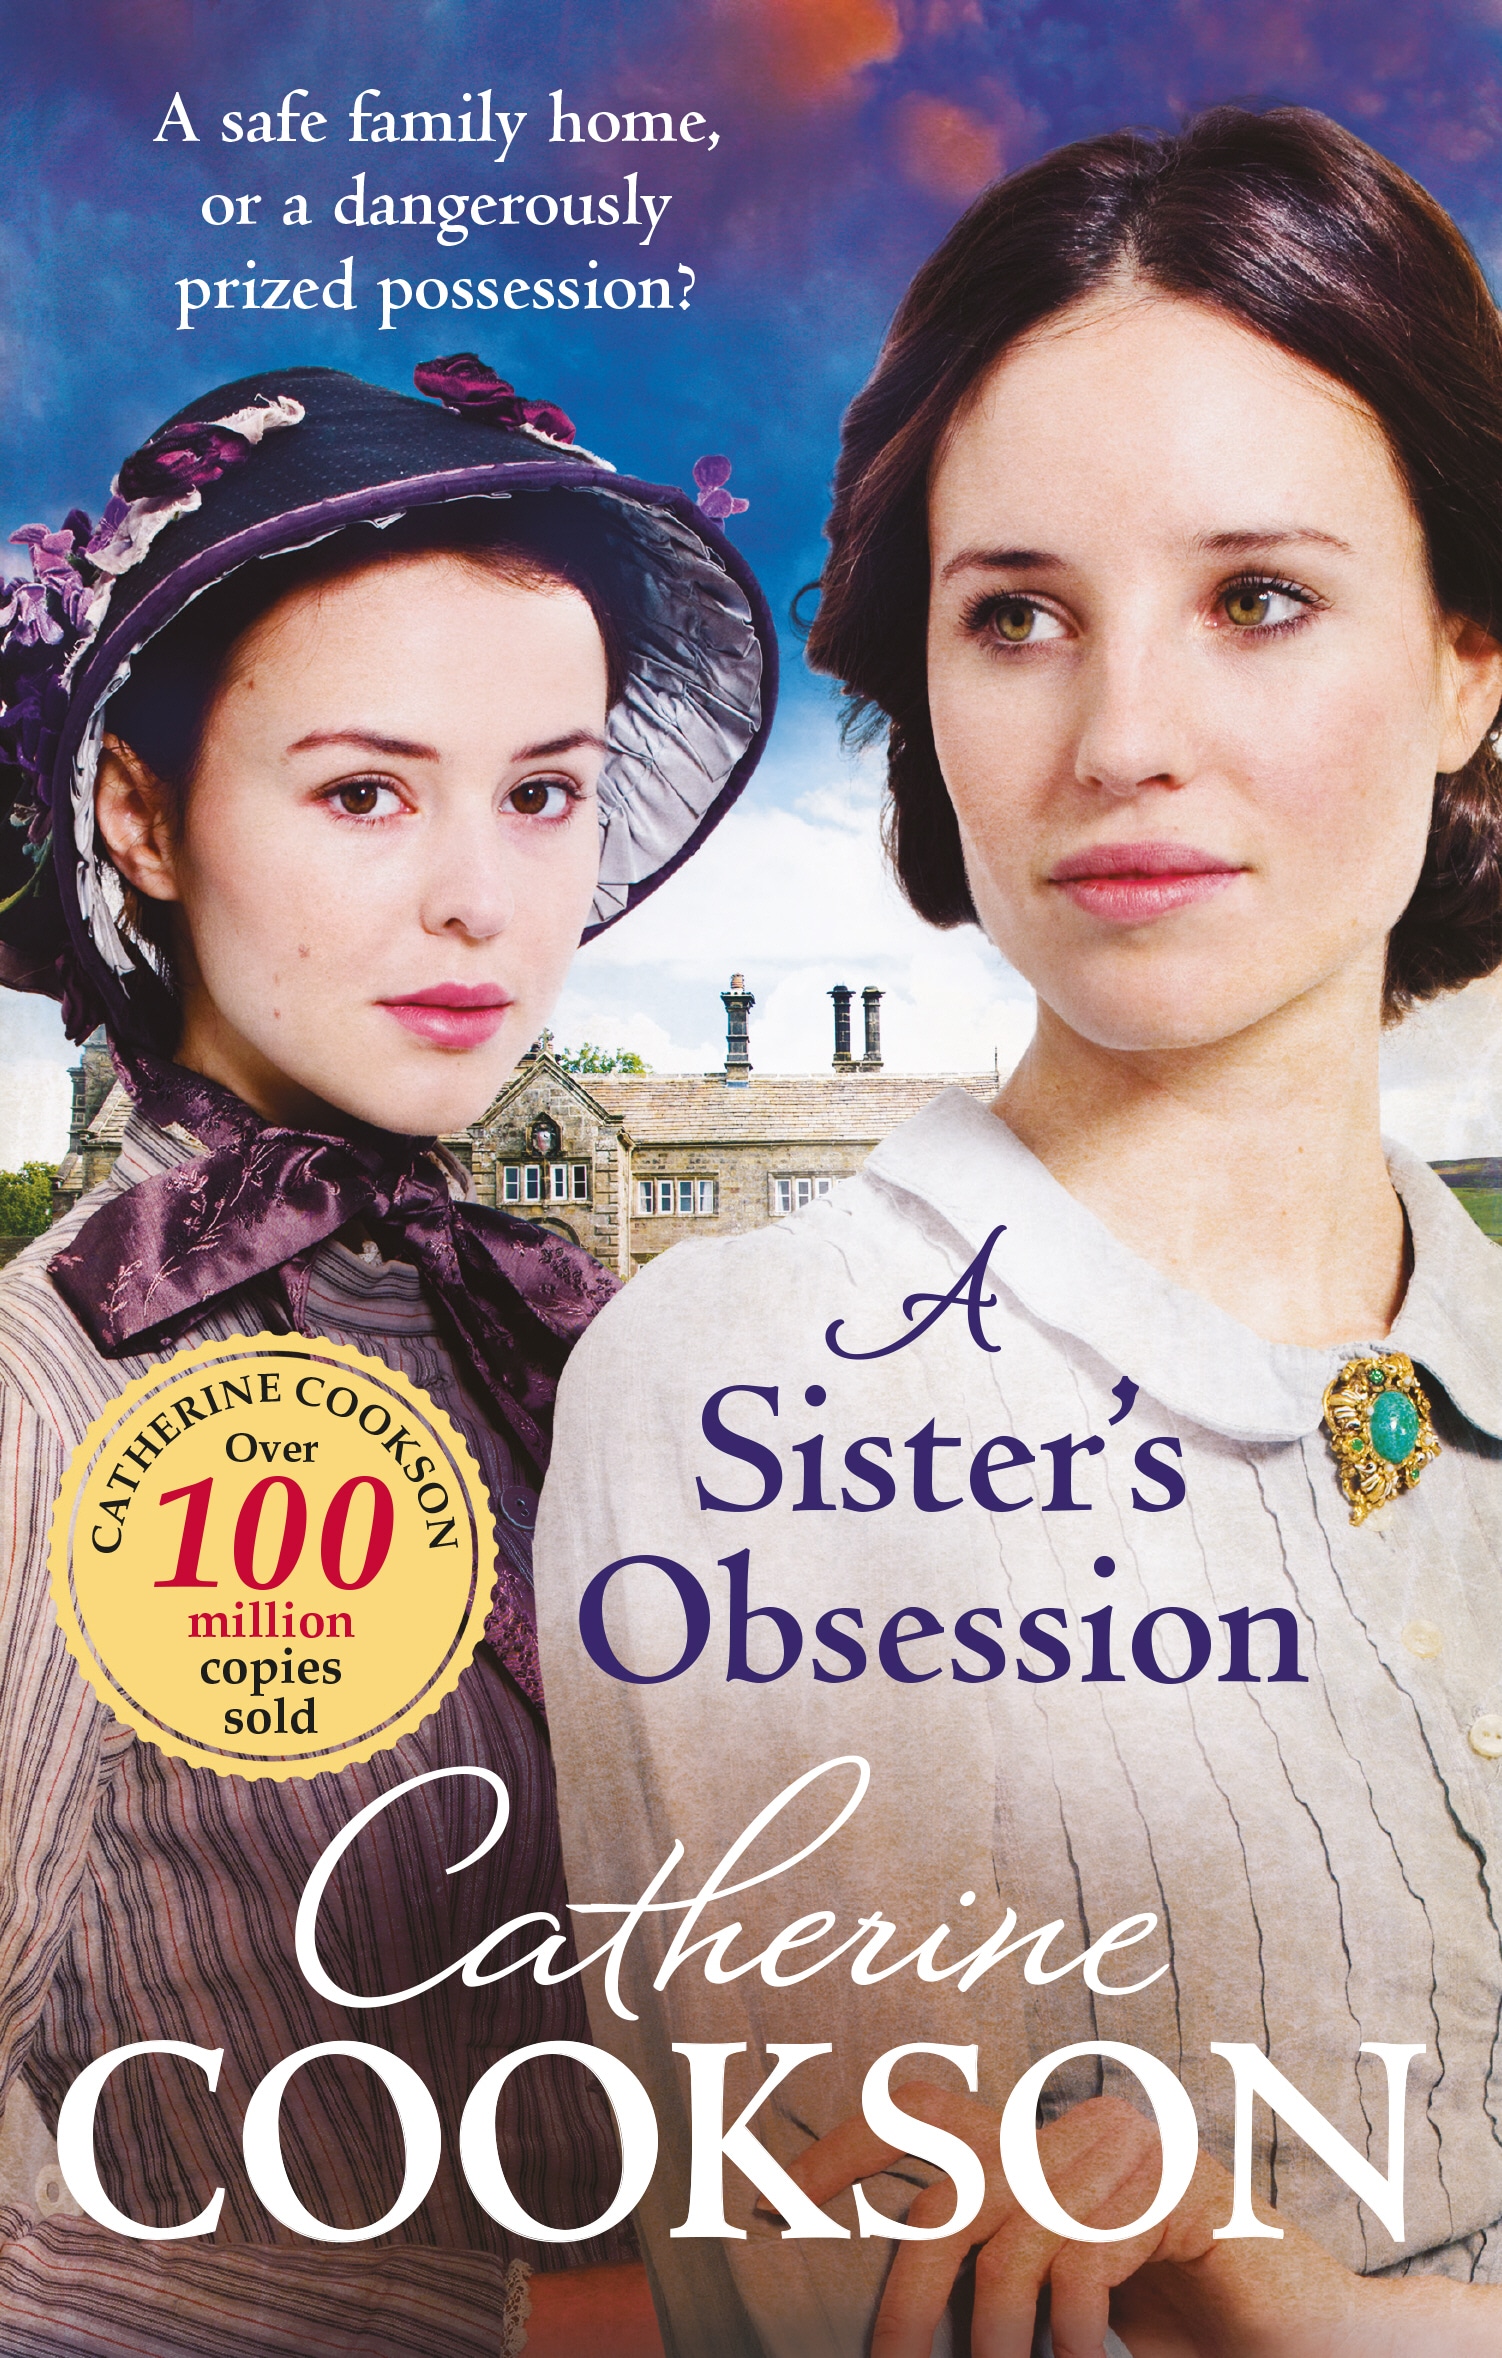 Book “A Sister's Obsession” by Catherine Cookson — June 27, 2019